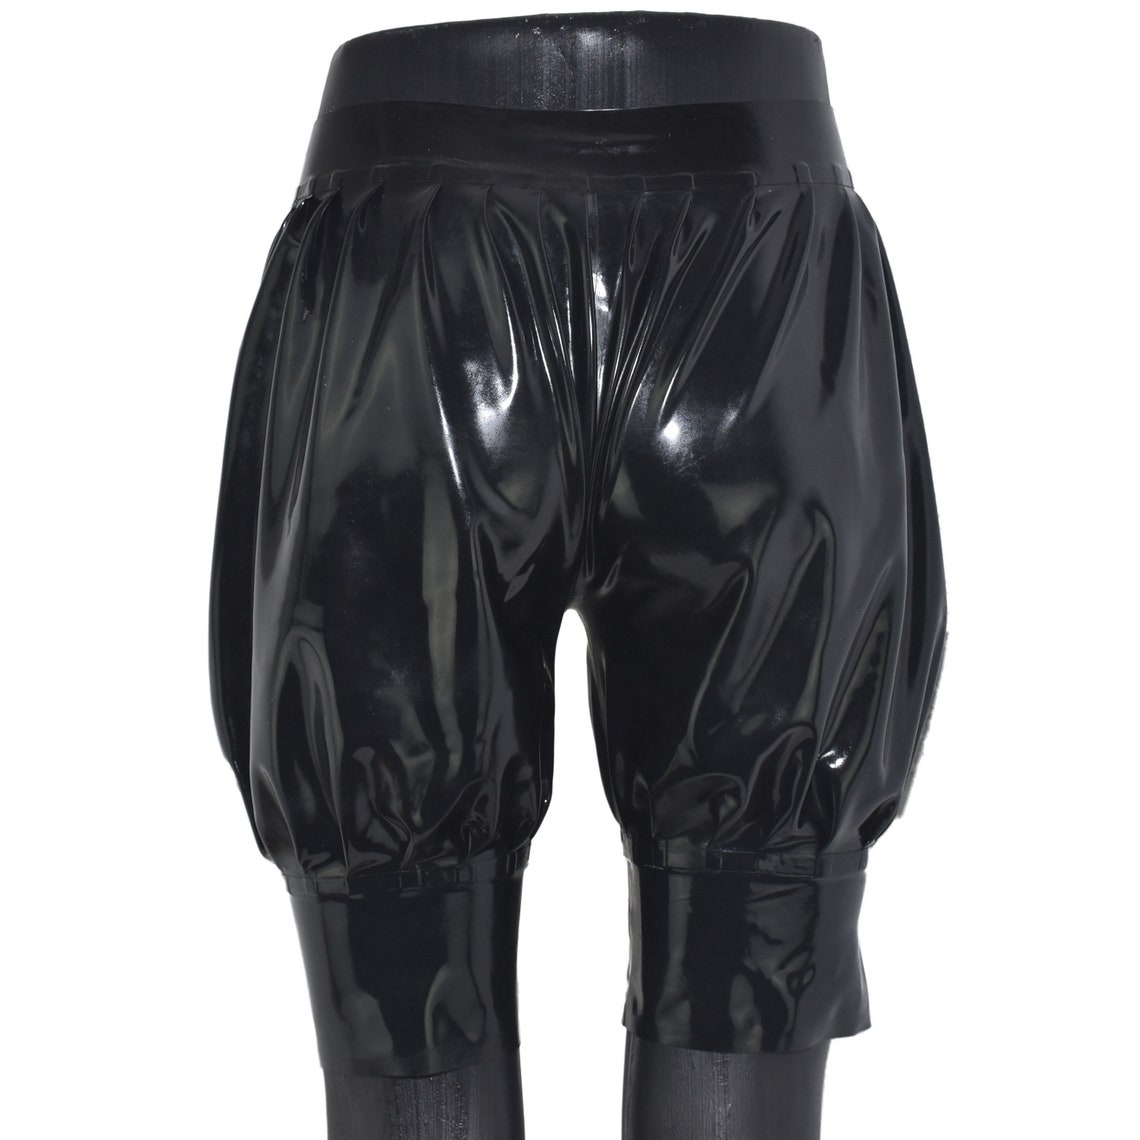 Latex Balloon Pants With Extra Wide Waistband on Hips and Legs - Etsy